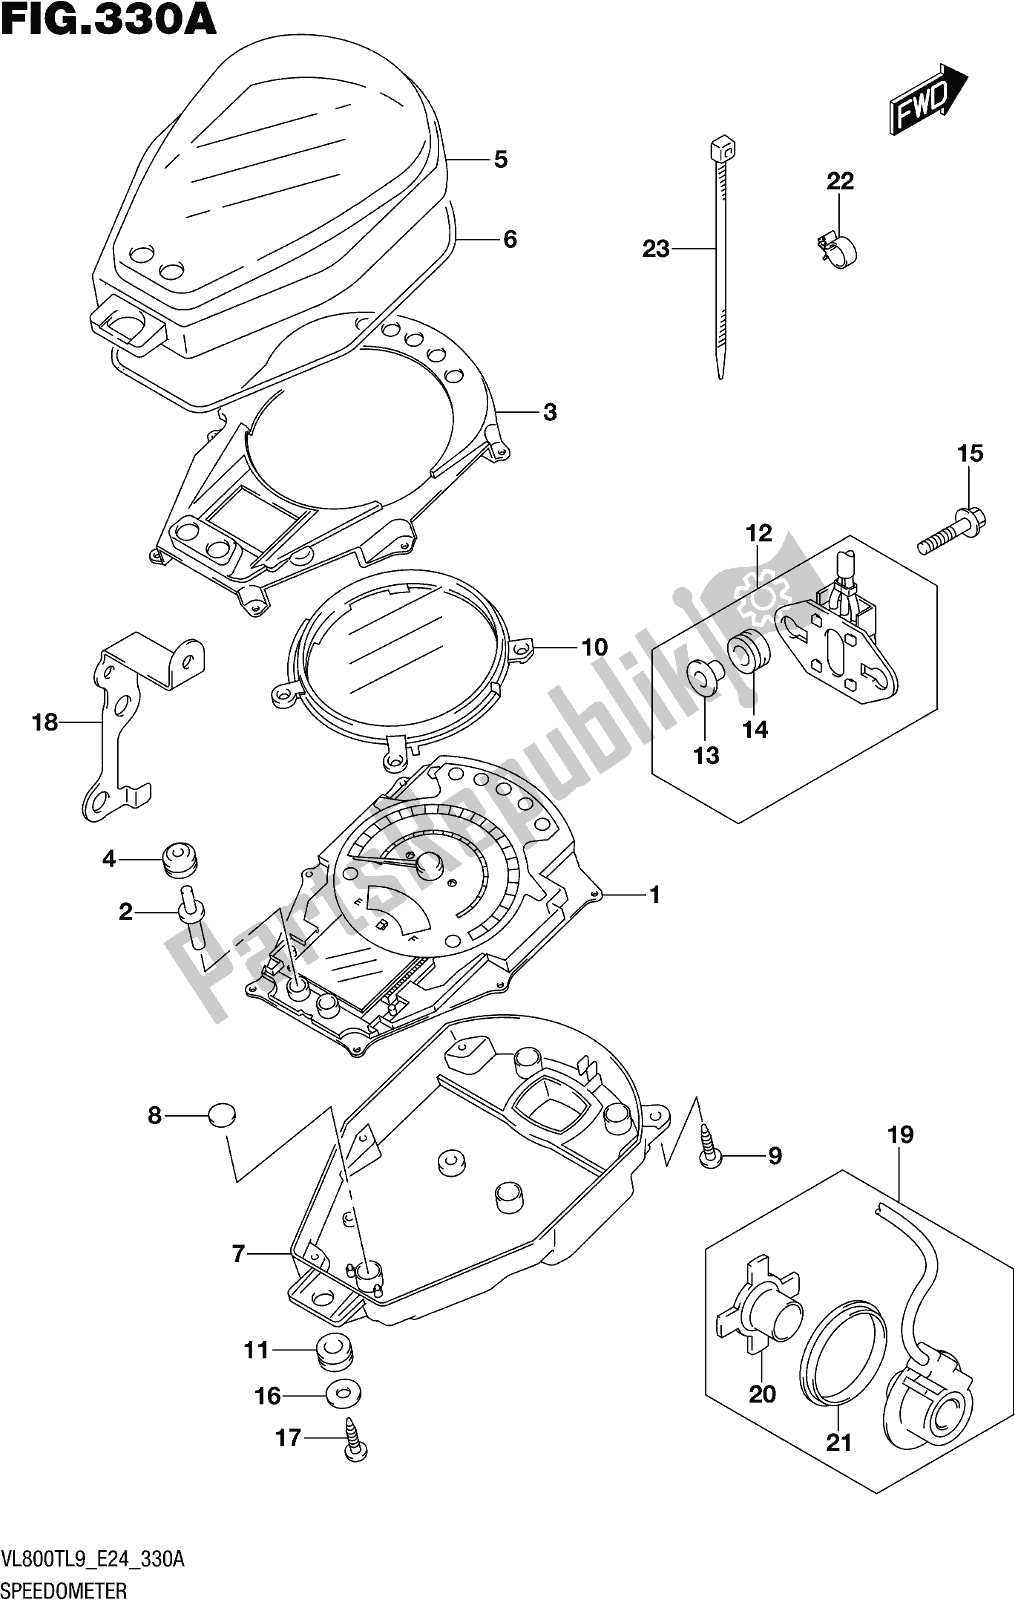 All parts for the Fig. 330a Speedometer of the Suzuki VL 800T 2019